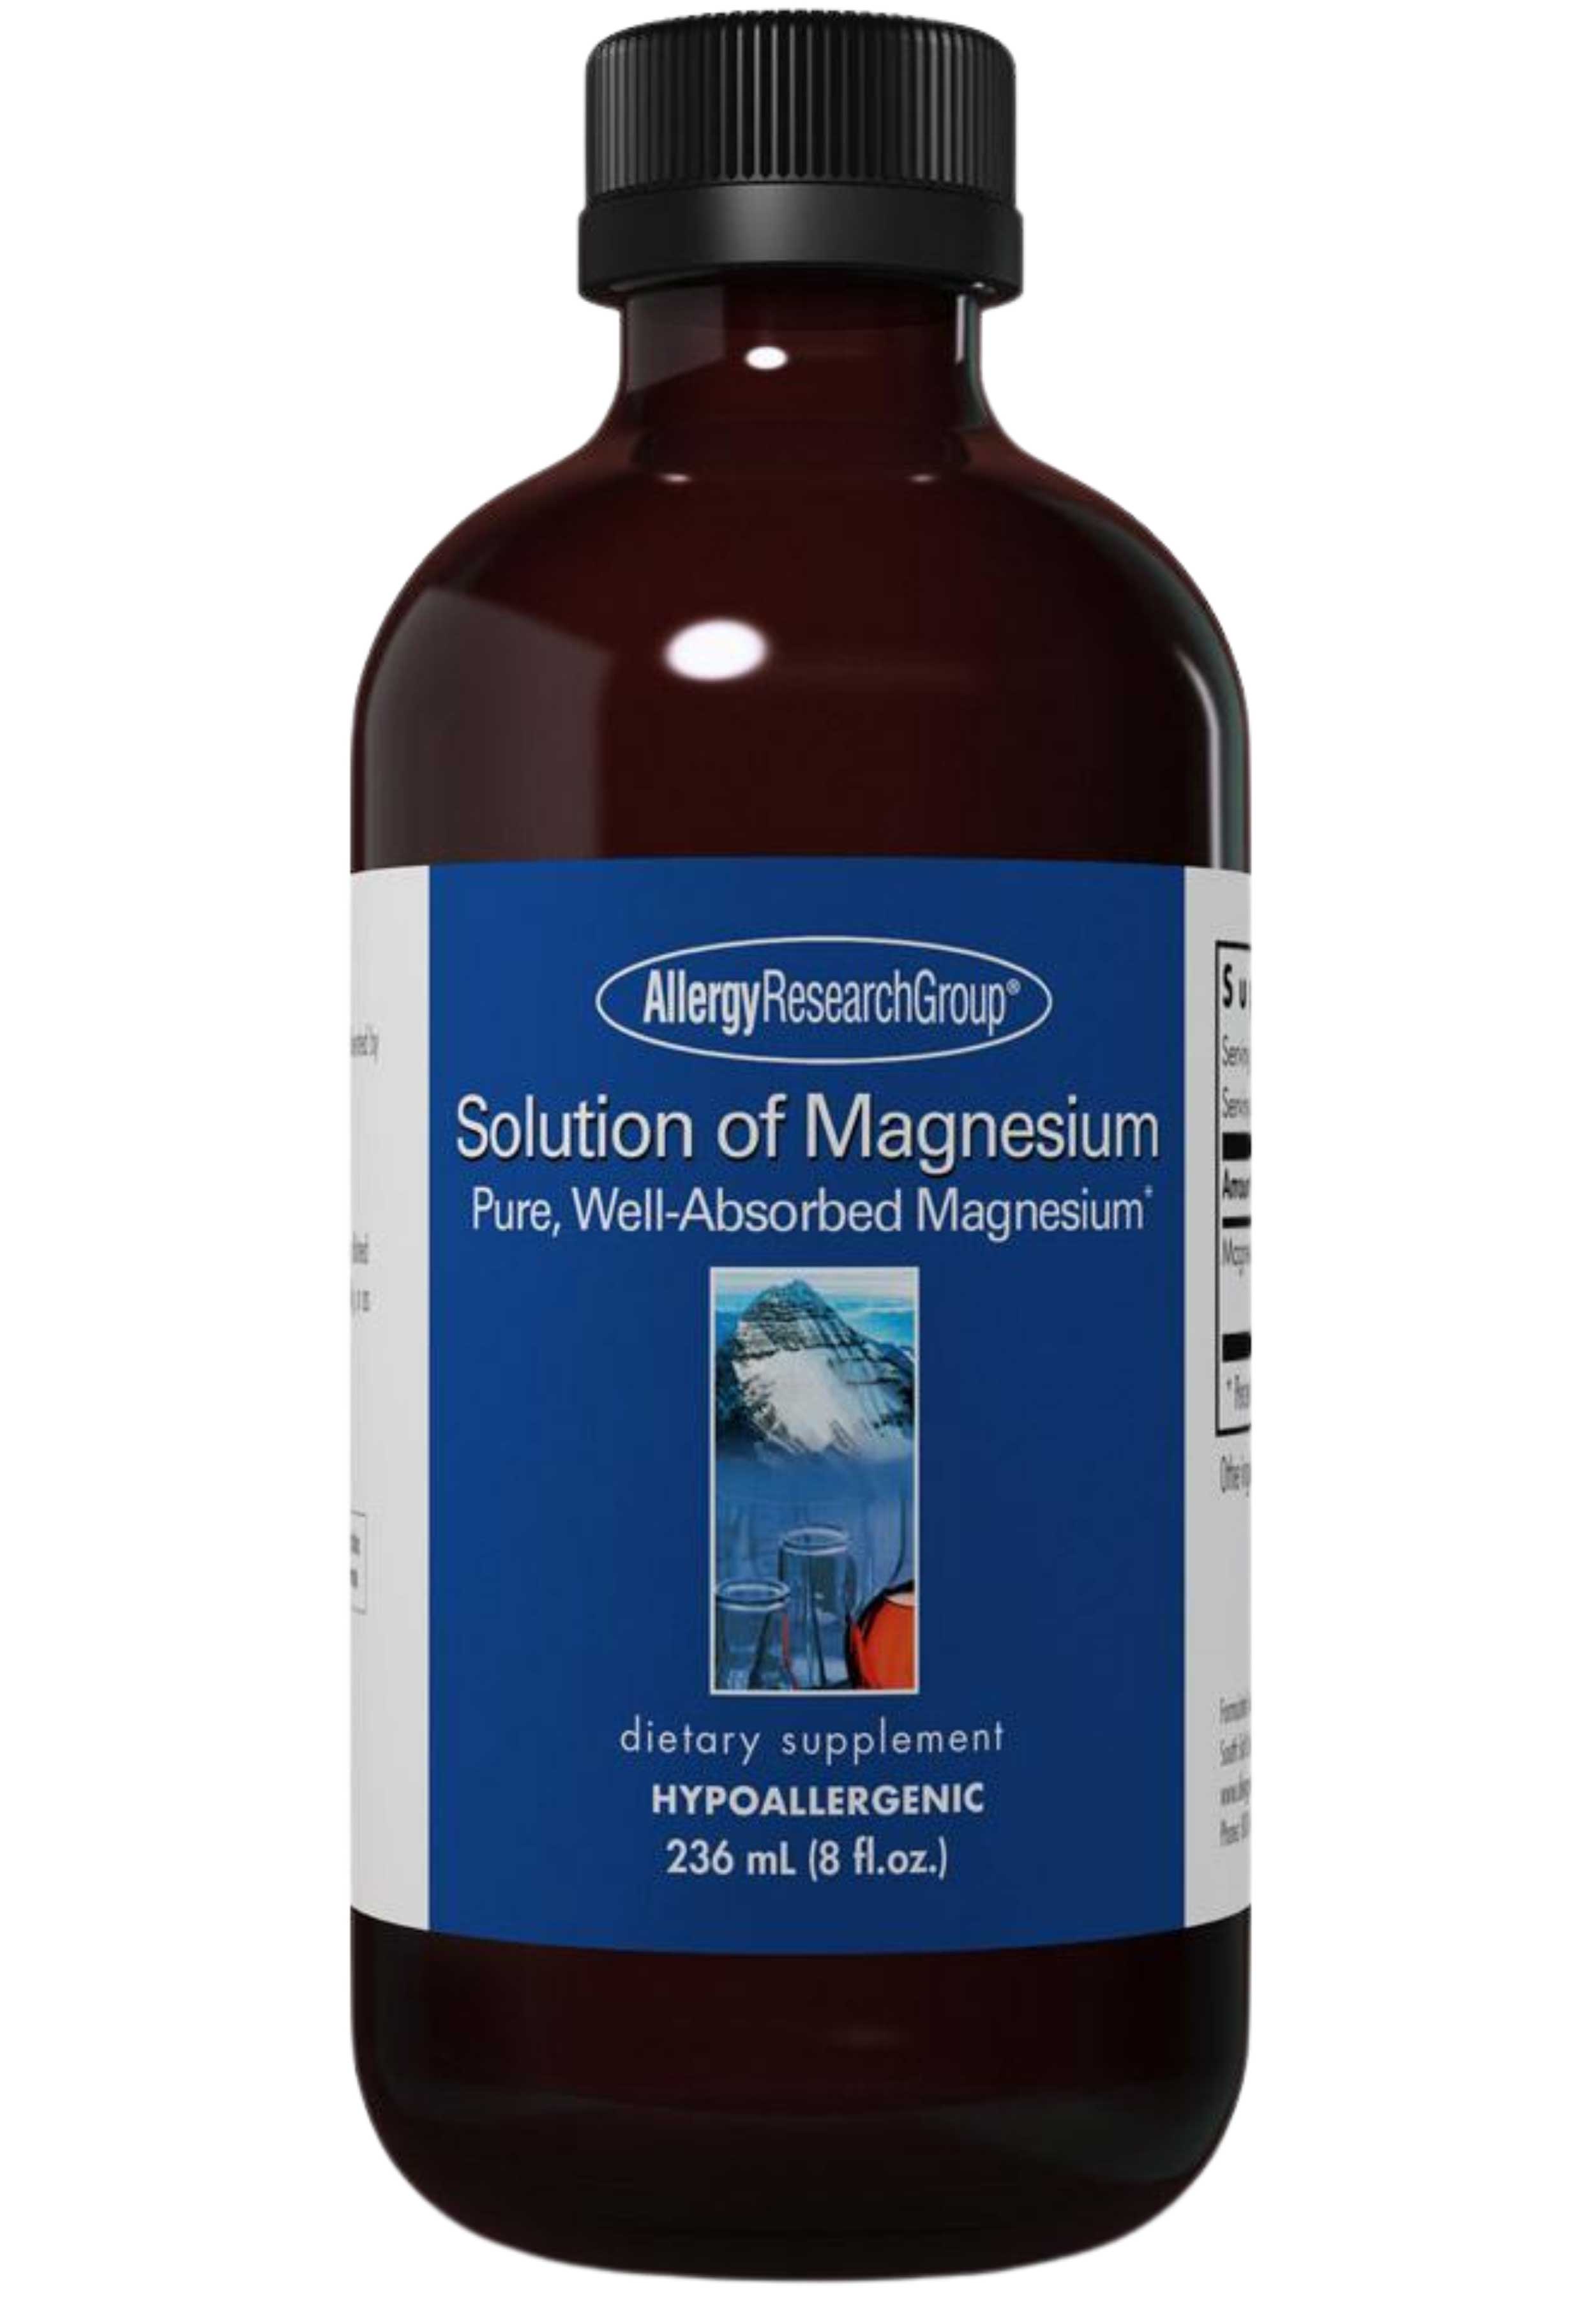 Allergy Research Group Solution of Magnesium